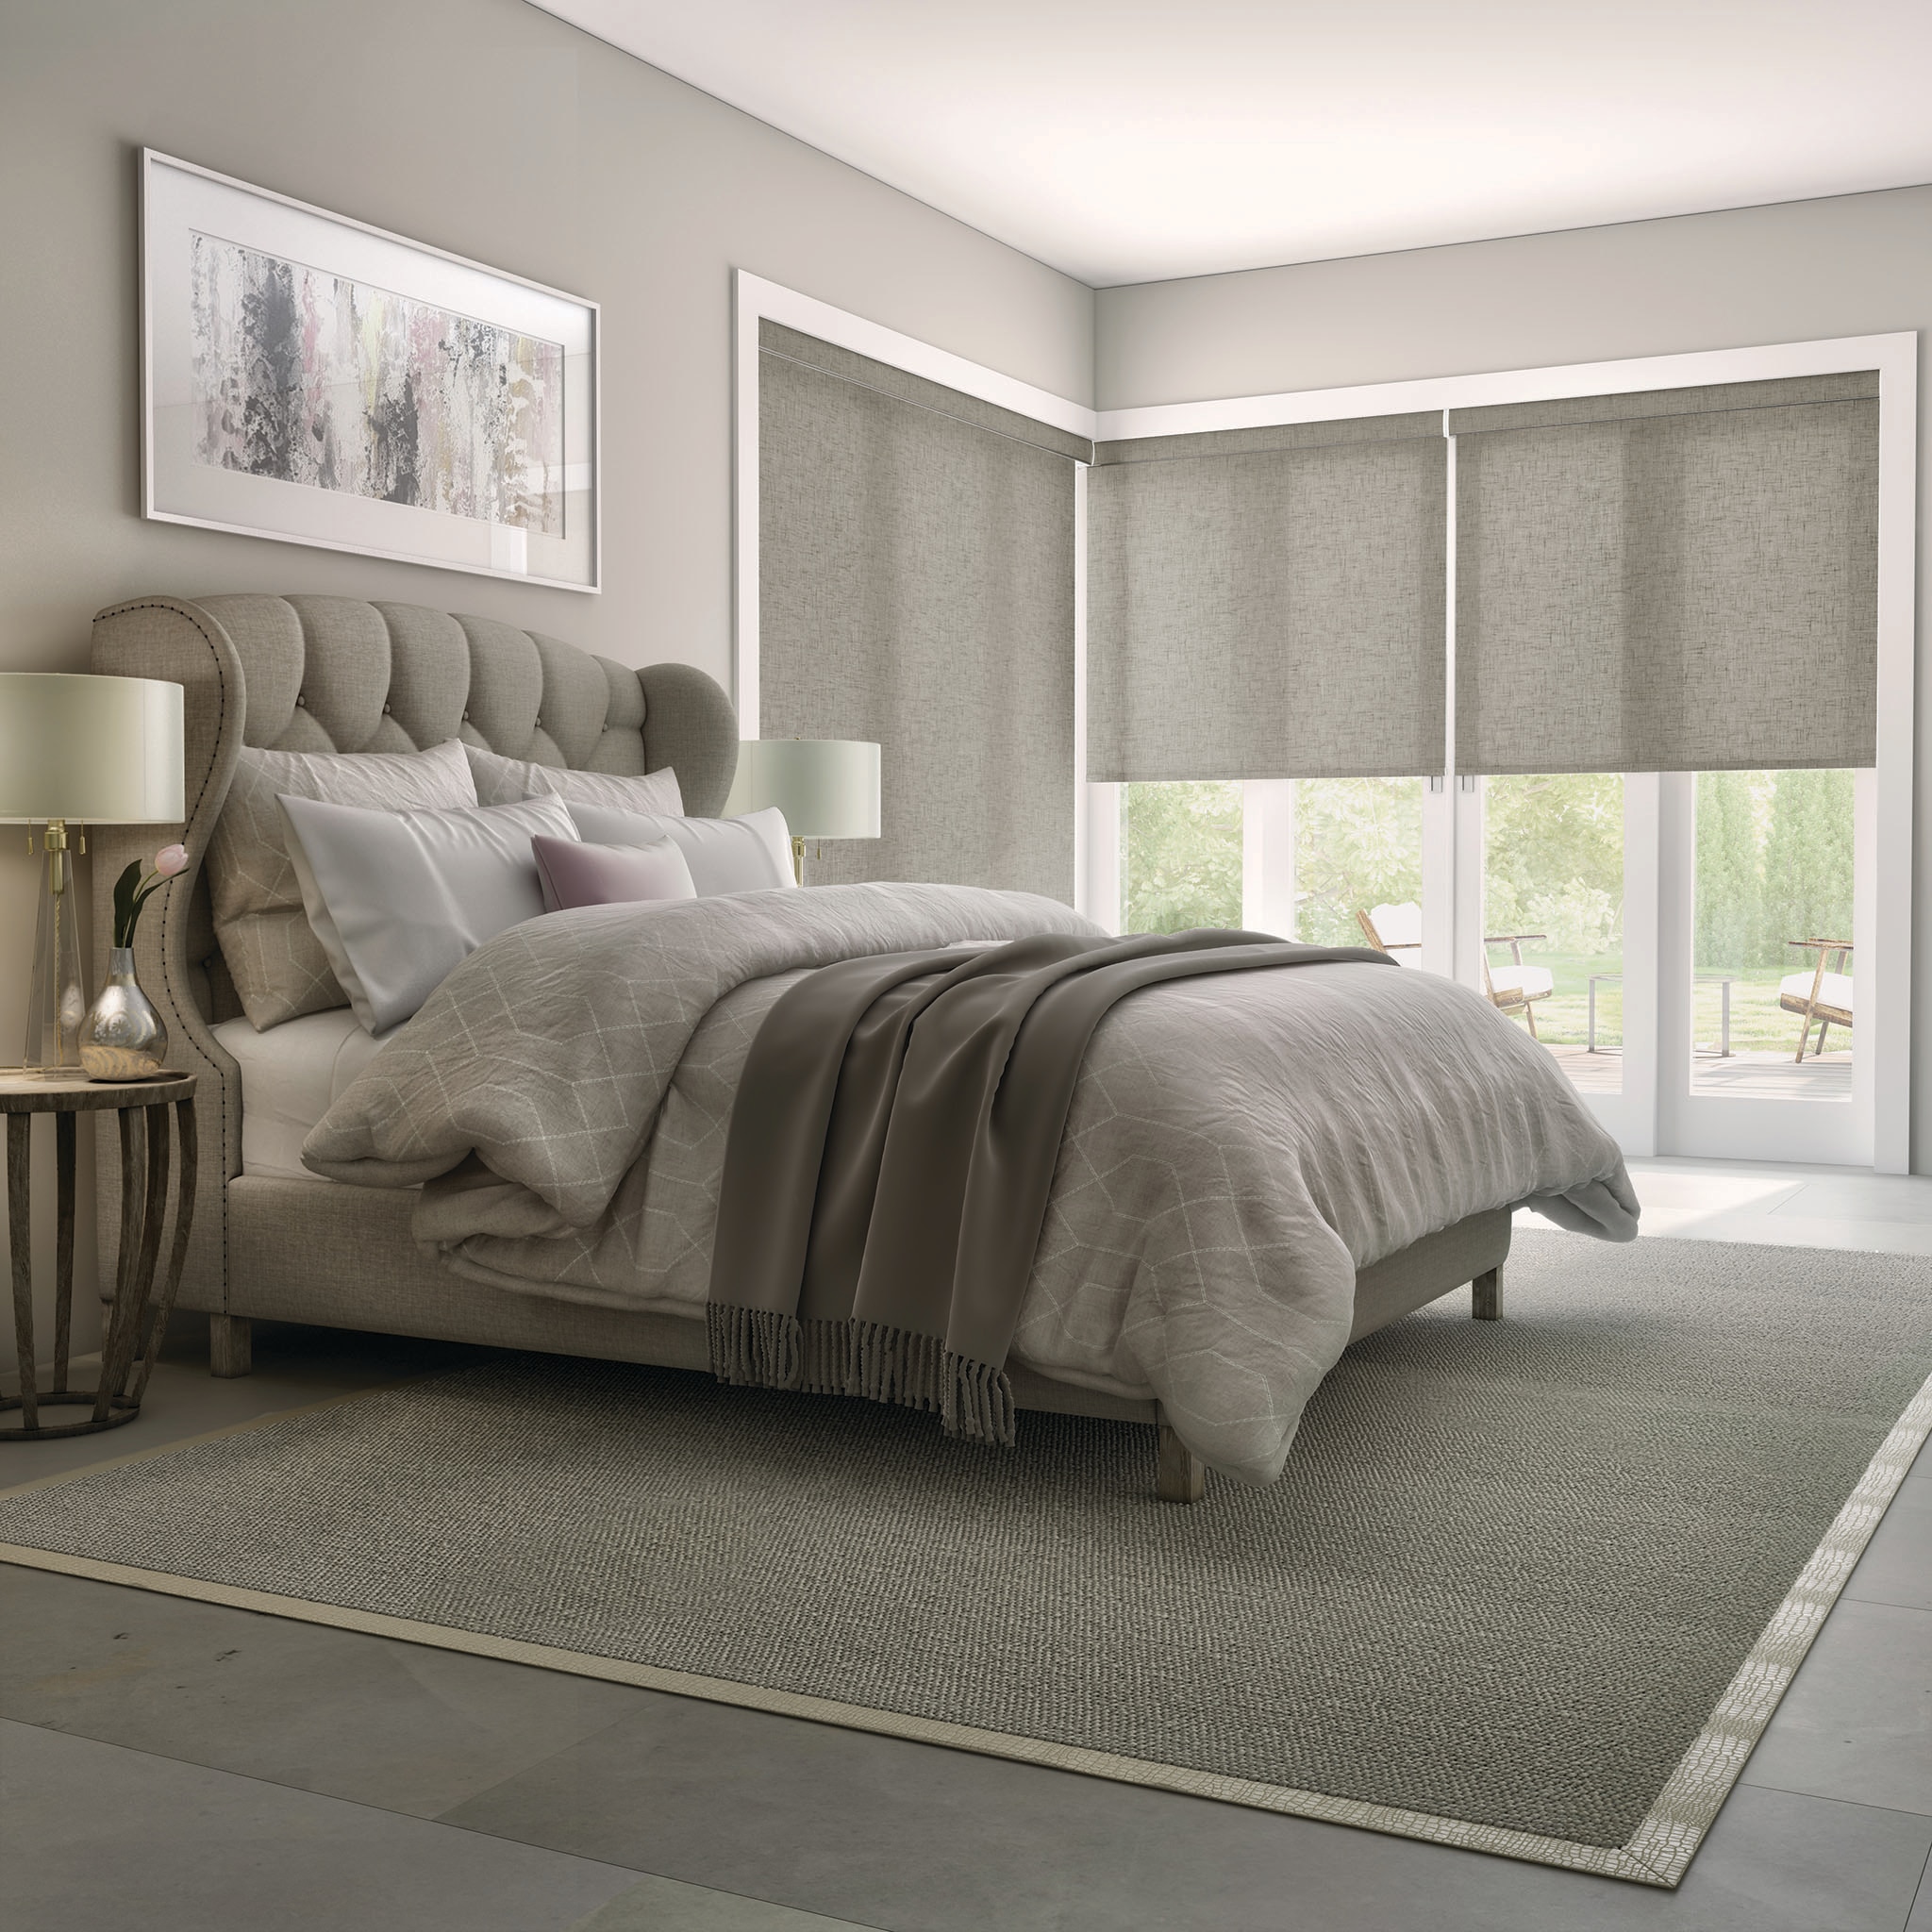 Details about   Levolor Blackout Room Darkening Cordless Roller Shade 37 X 78 in. 